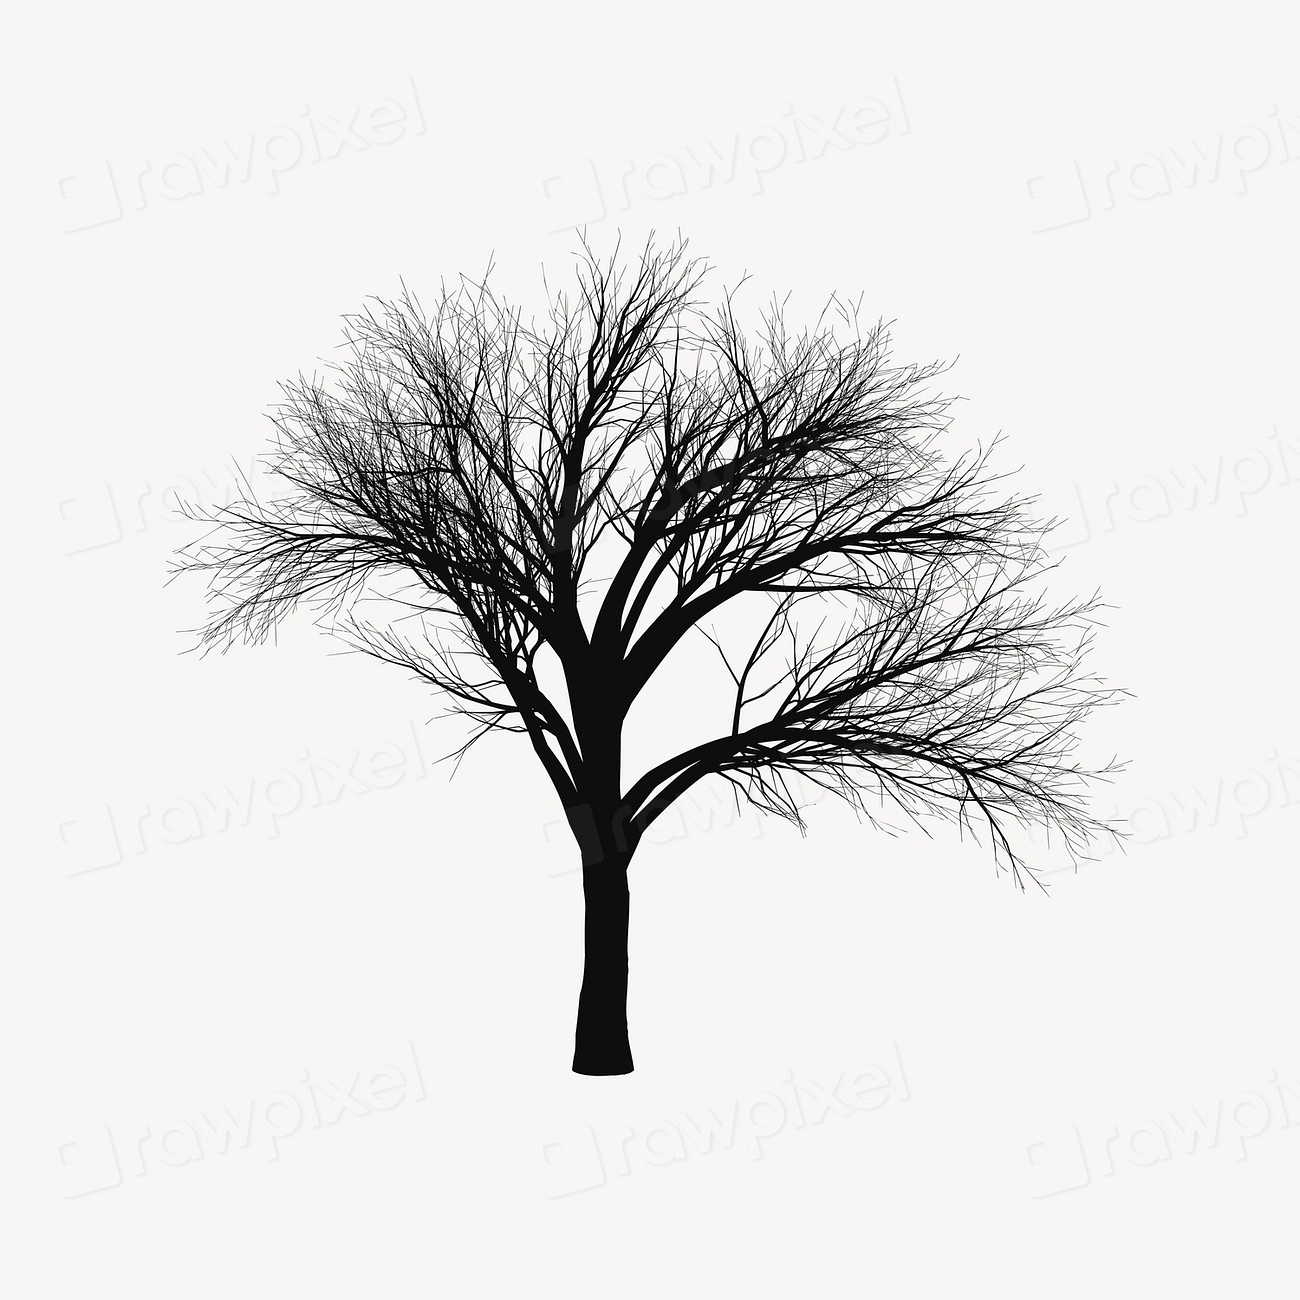 Leafless tree silhouette illustration psd. | Free PSD - rawpixel